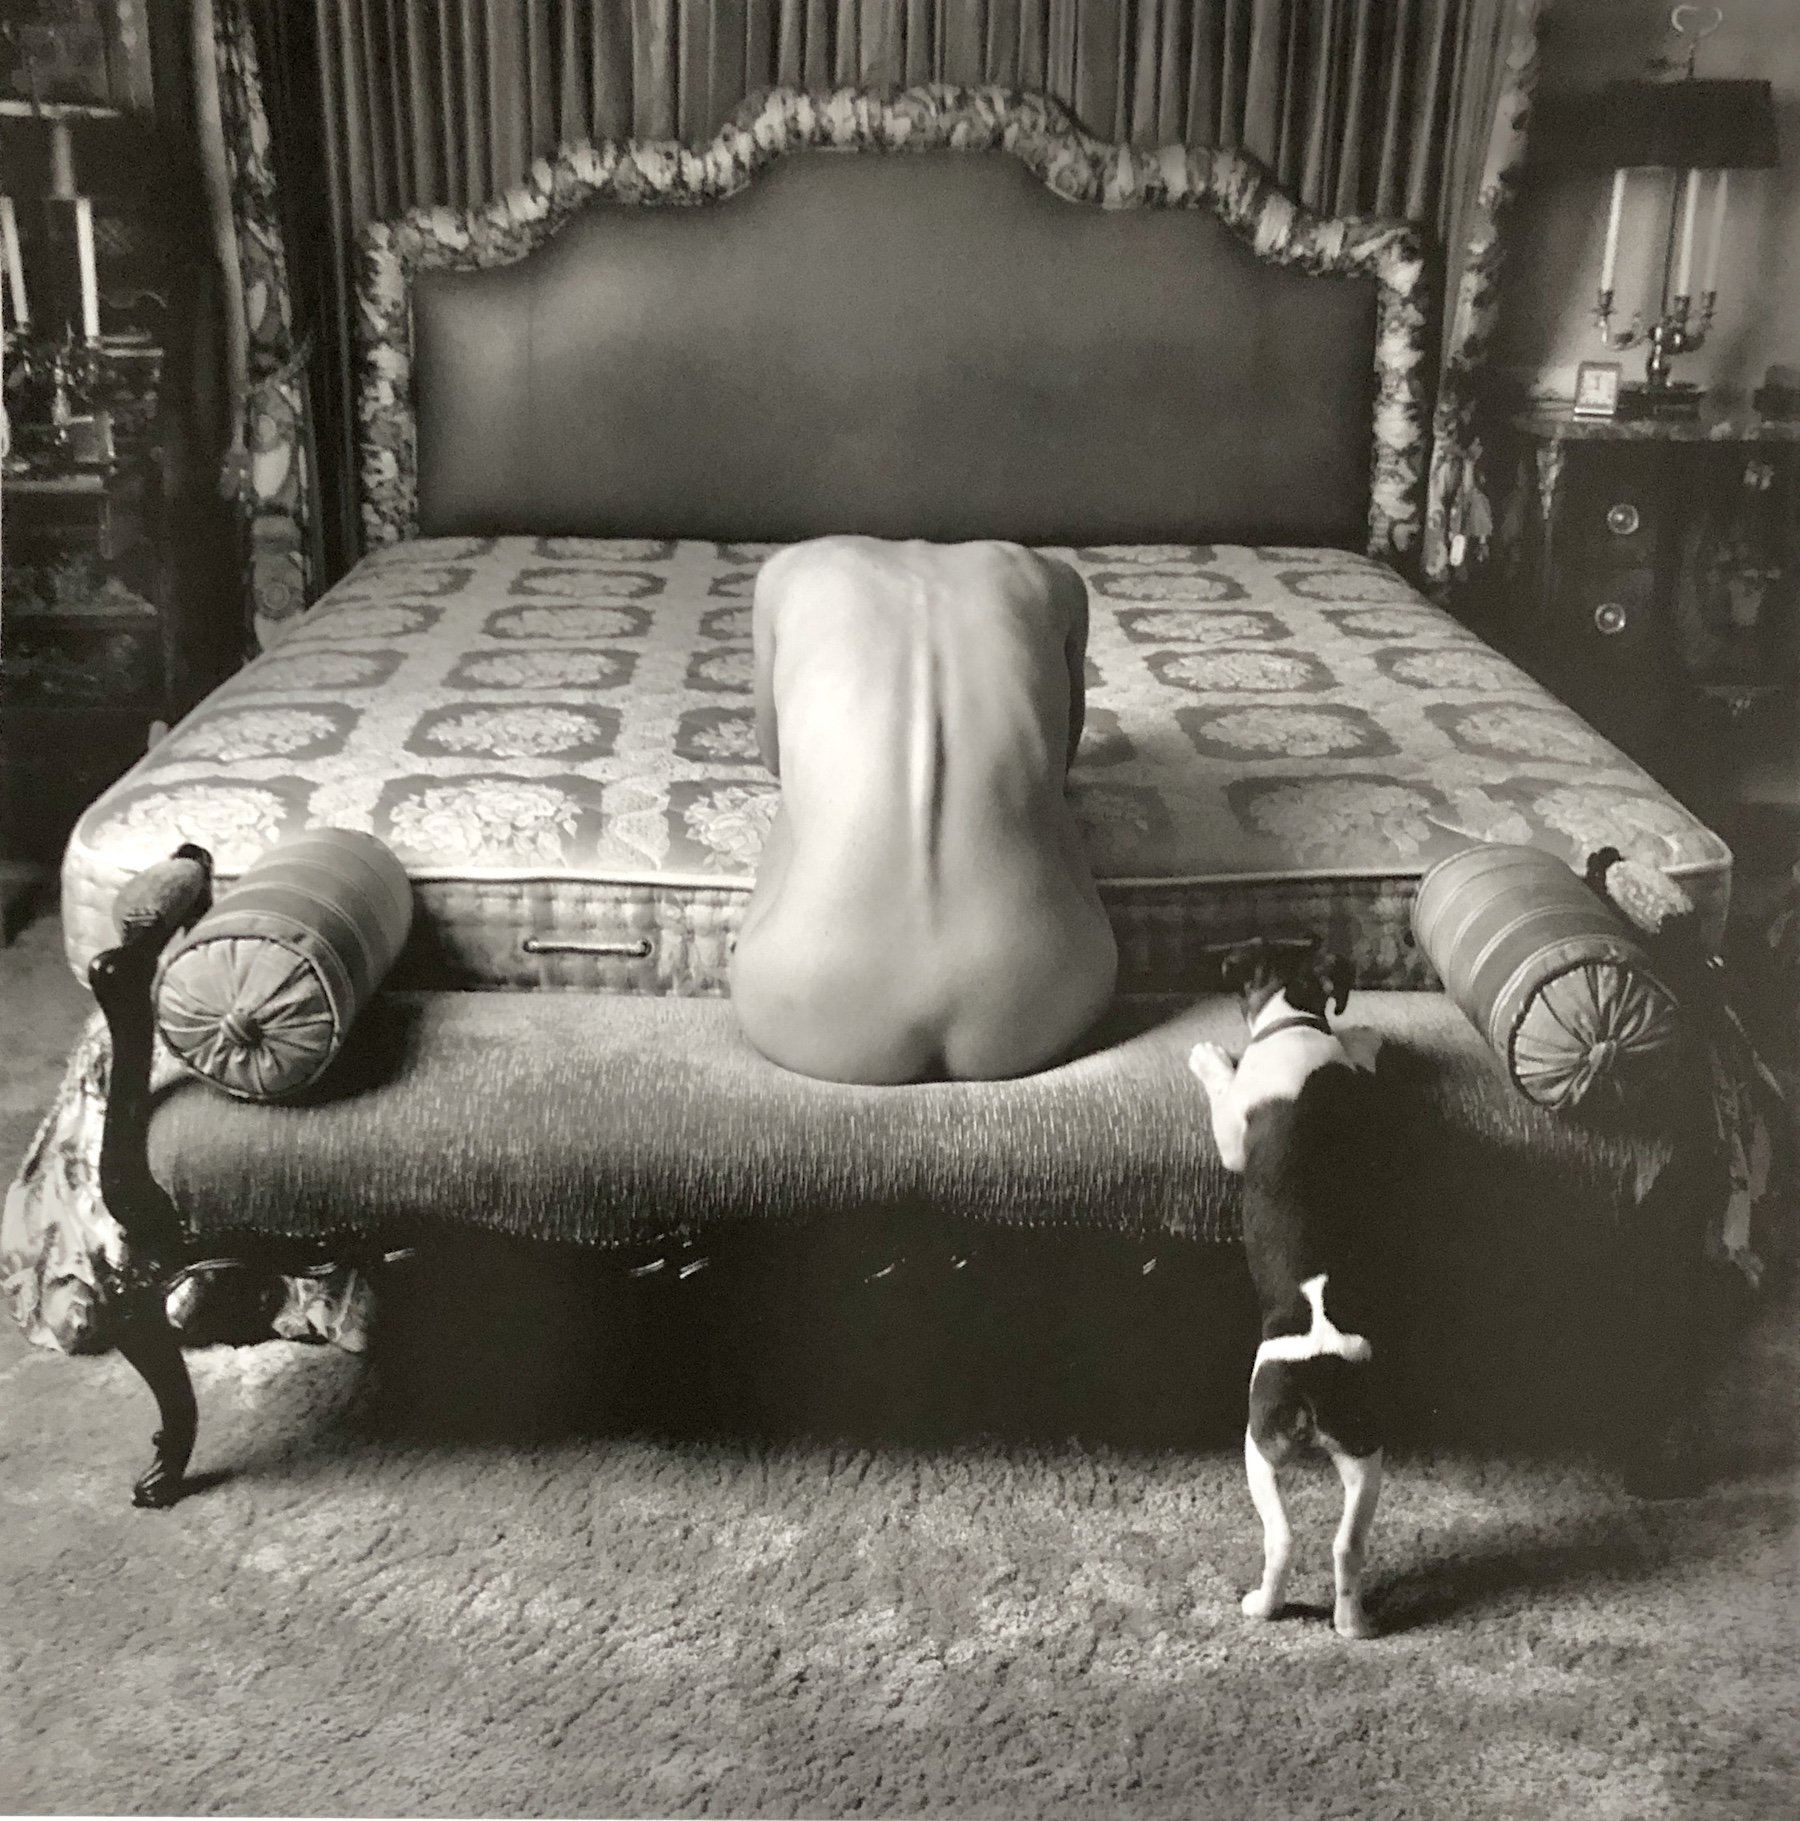 woman, dog, bed